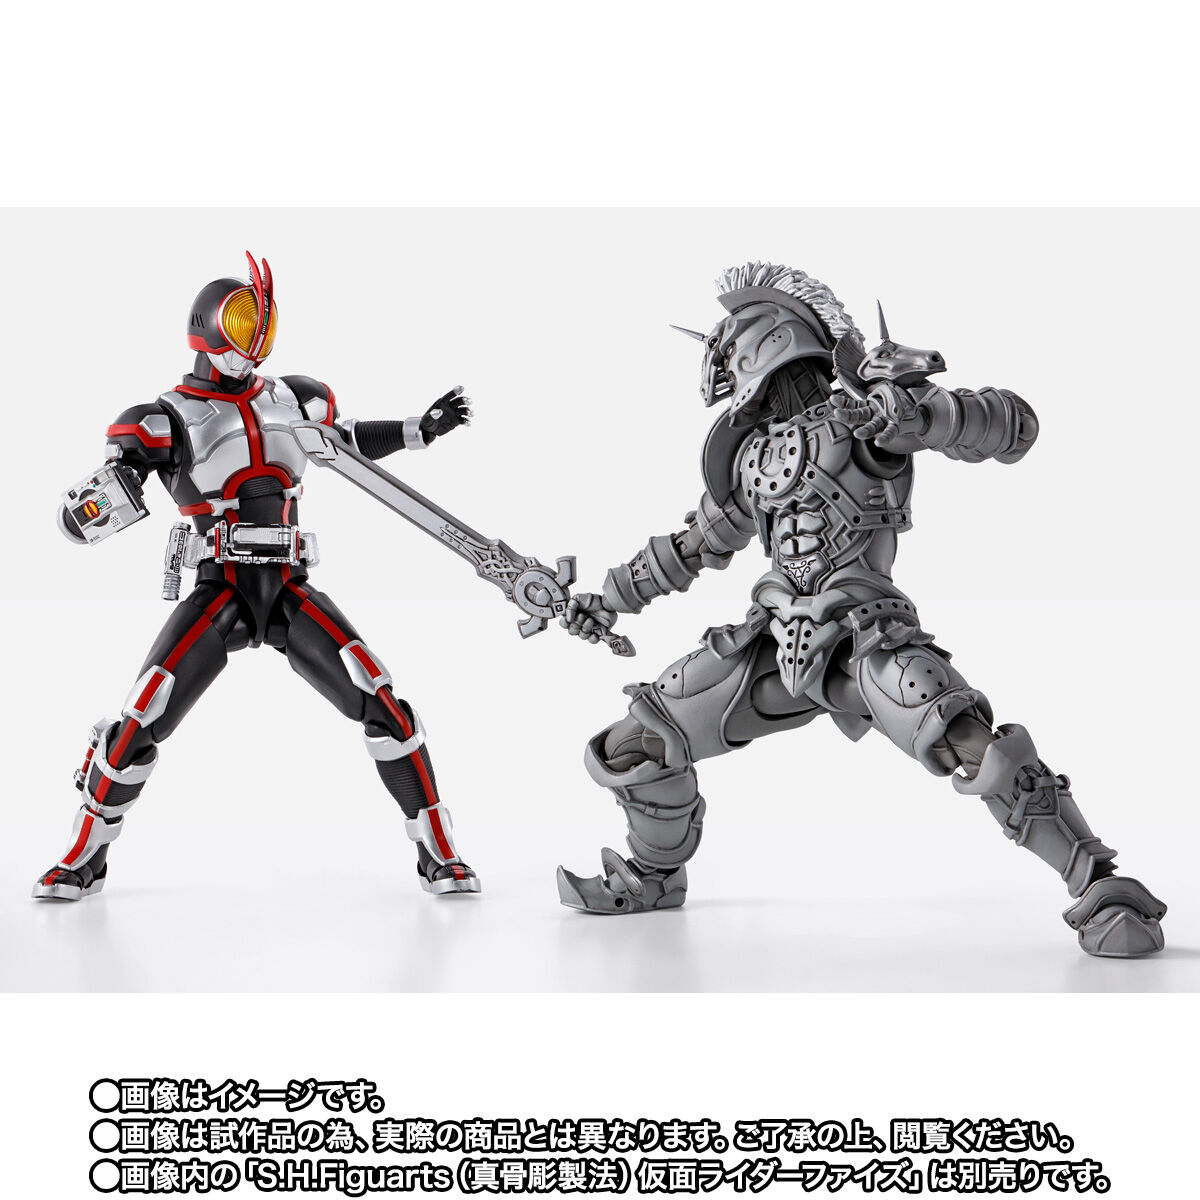 H.Figuarts 真骨彫製法 仮面ライダーファイズ ホースオルフェノク 新品-